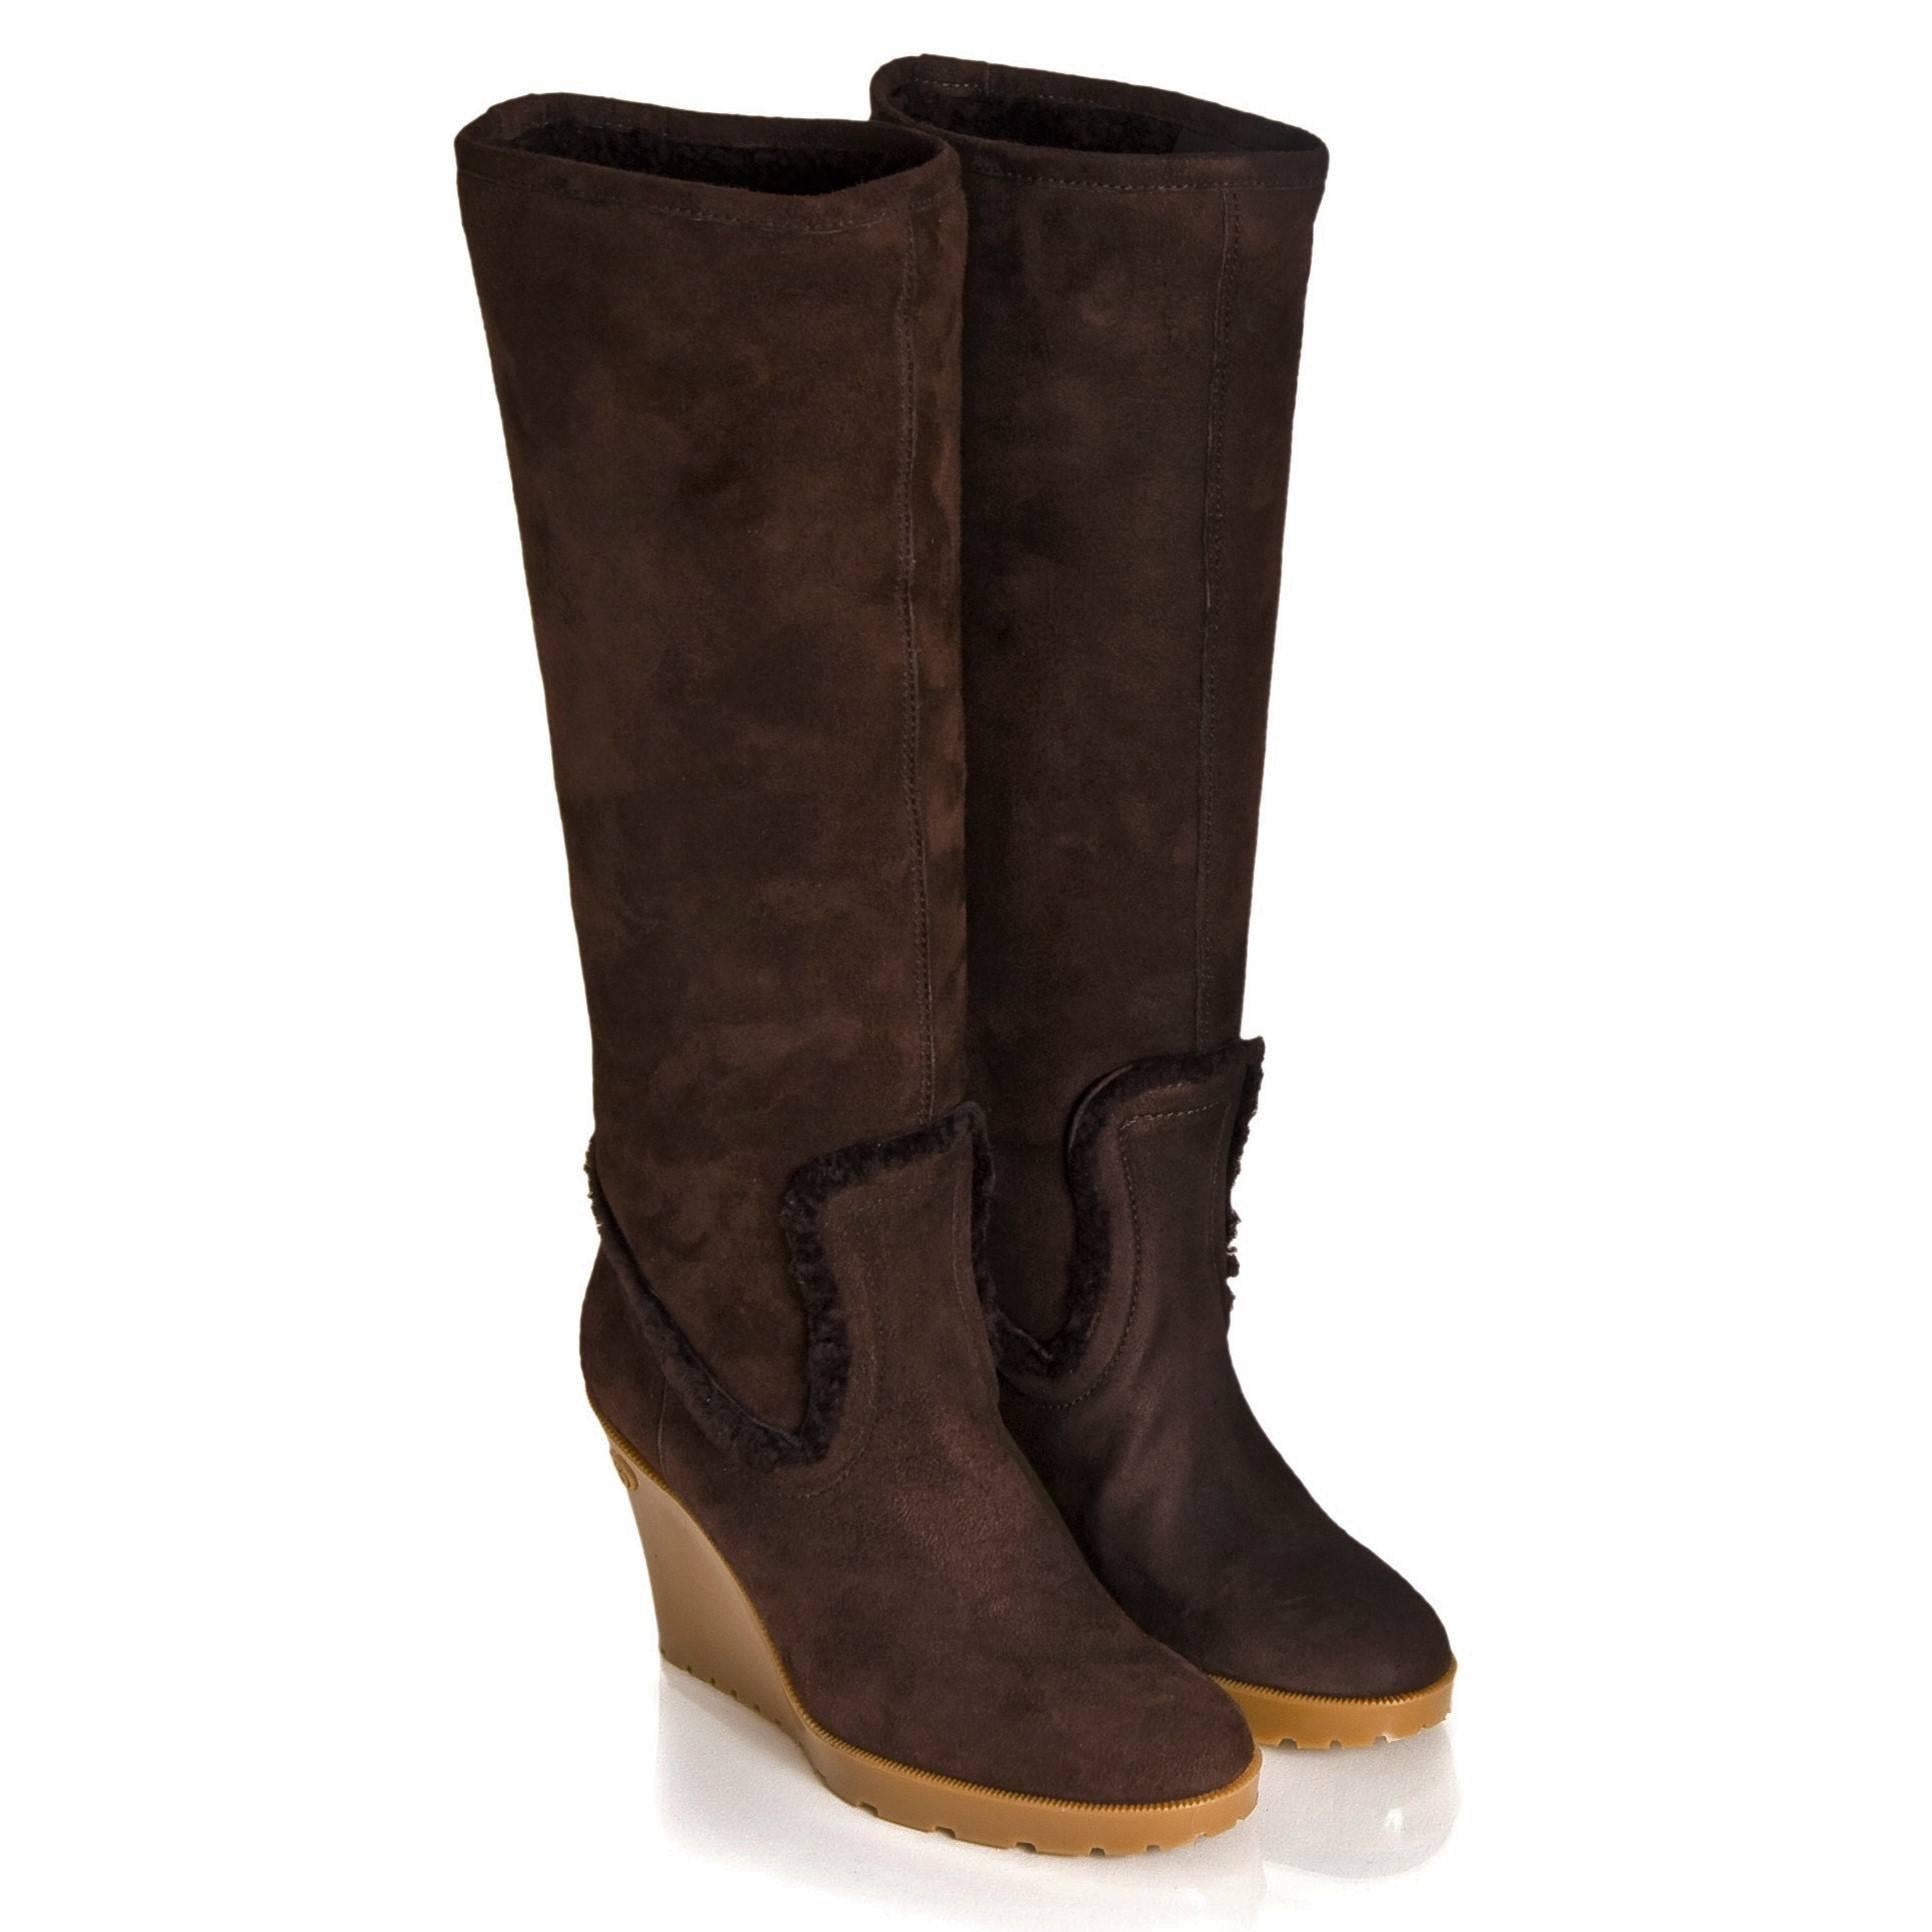 New Gucci Chocolate Brown Shearling Wedge Boots Sz 7 For Sale 4